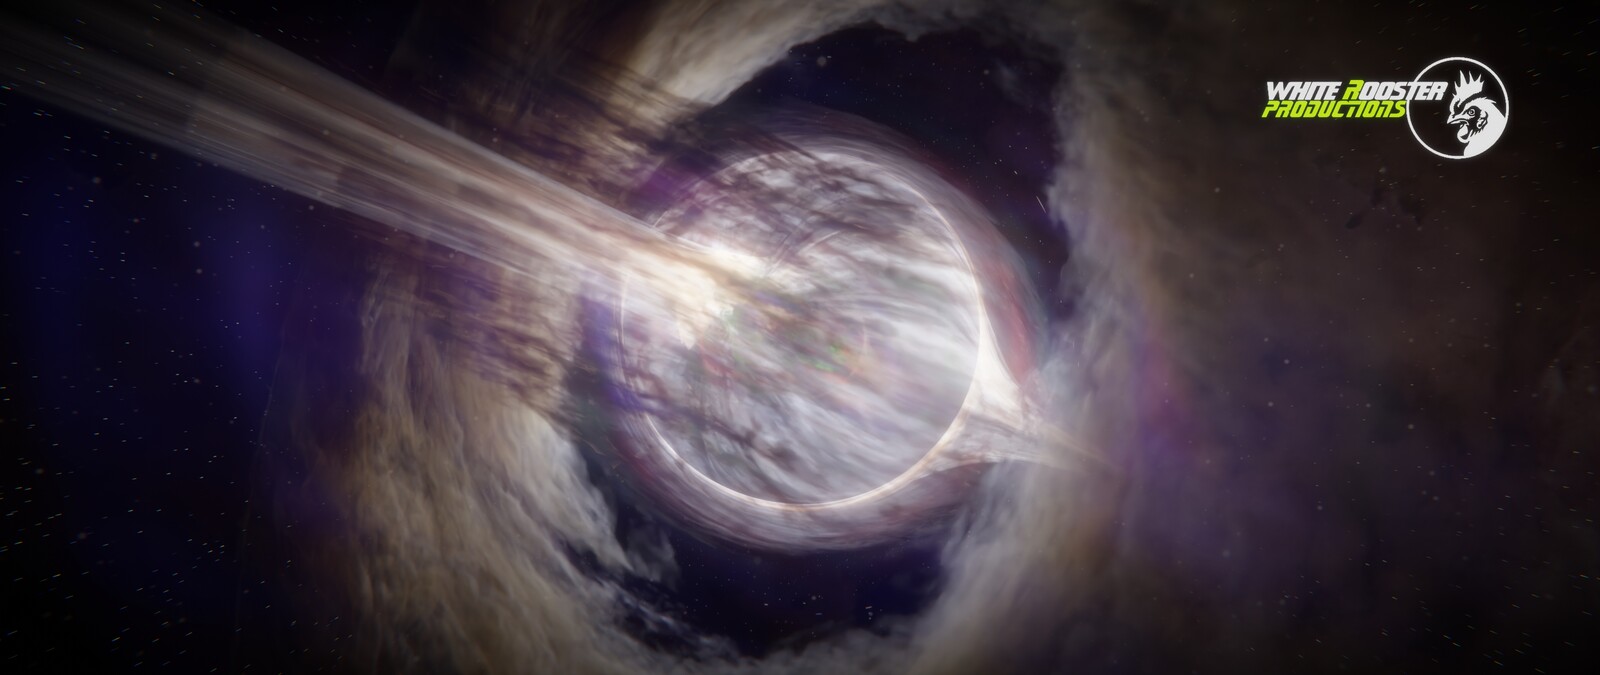 Quasar, the brightest most powerful force we know of in nature.